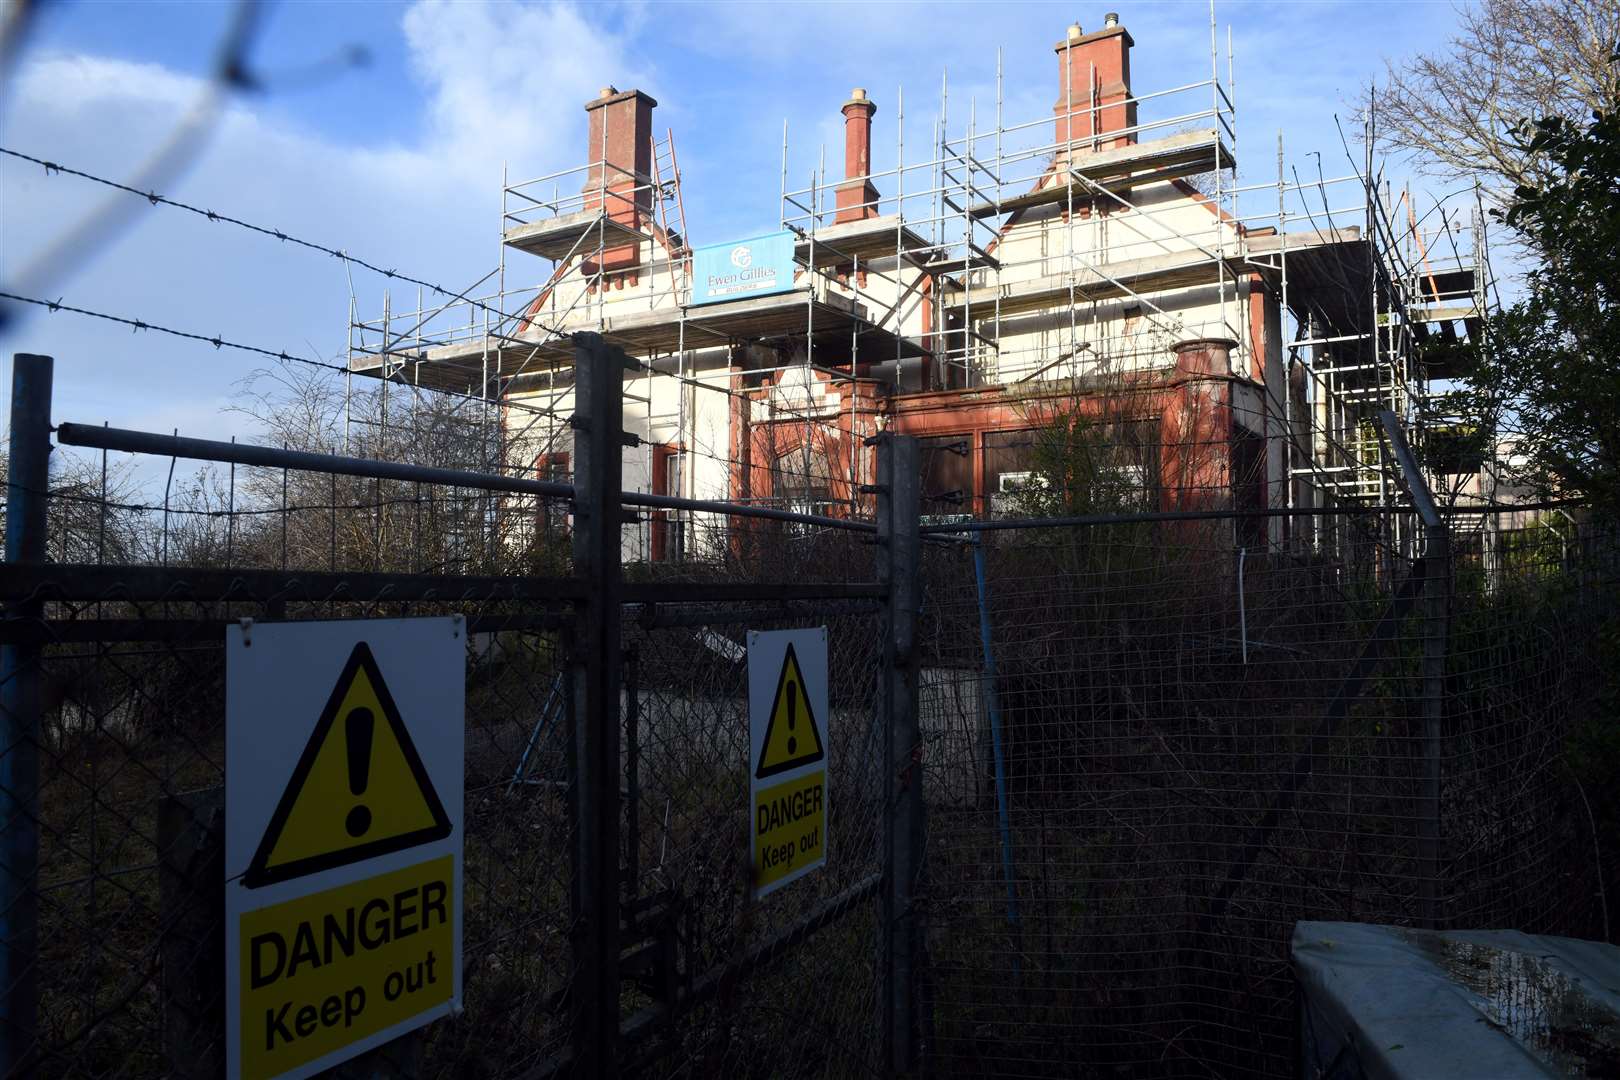 Is it time to demolish Viewhill House?